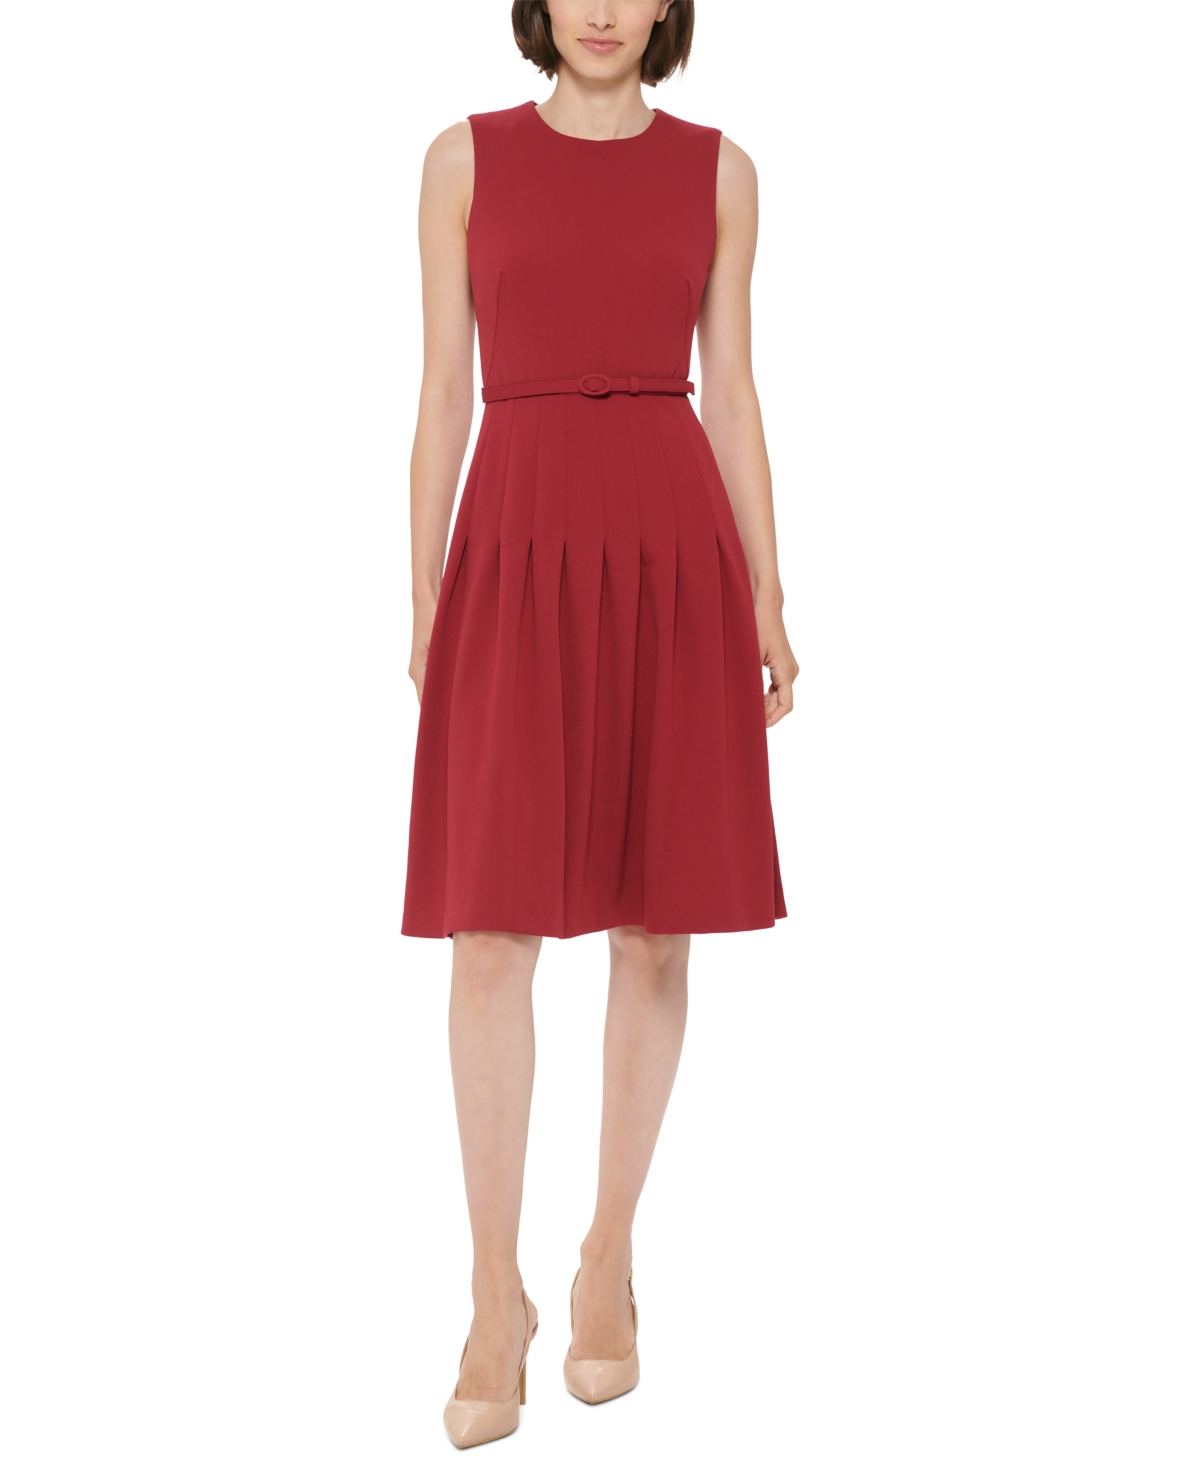 Calvin Klein Belted Sleeveless Fit & Flare Dress